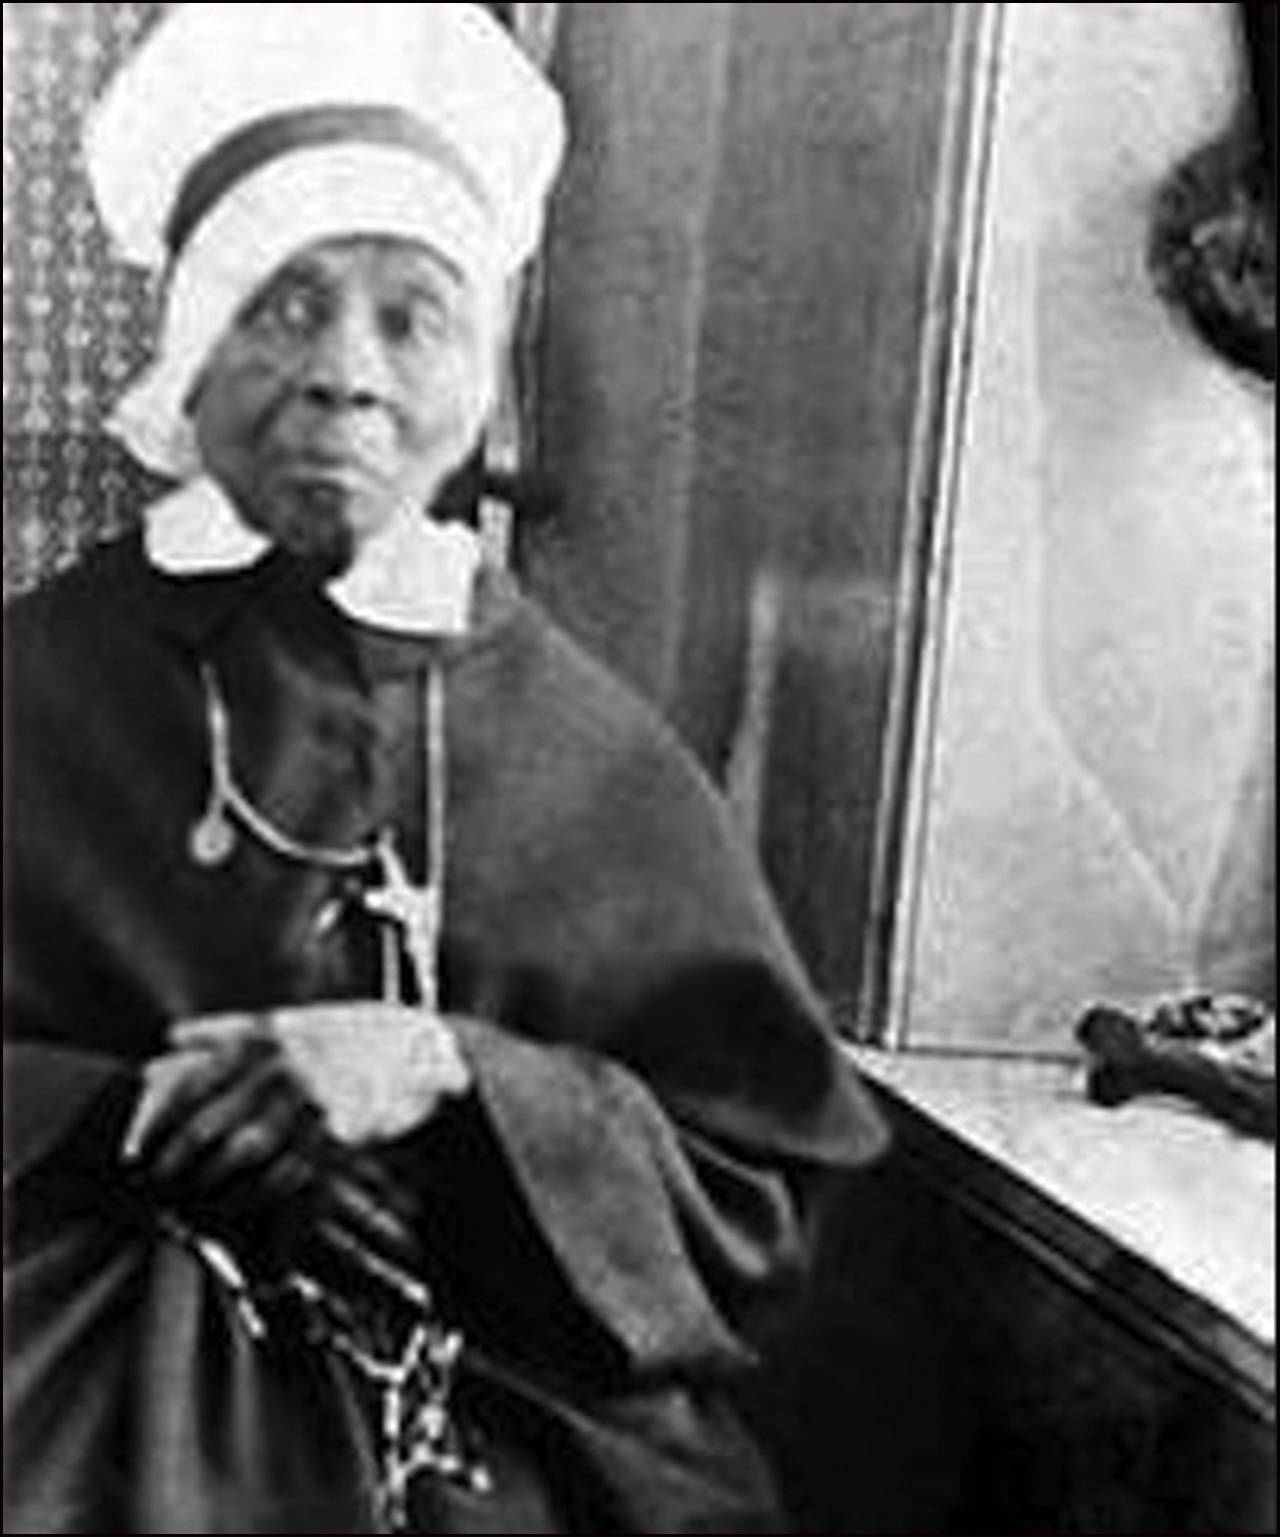 Mother Mary Lange - Mary Elizabeth Lange was a Black Catholic religious sister who founded the Oblate Sisters of Providence (OSP).